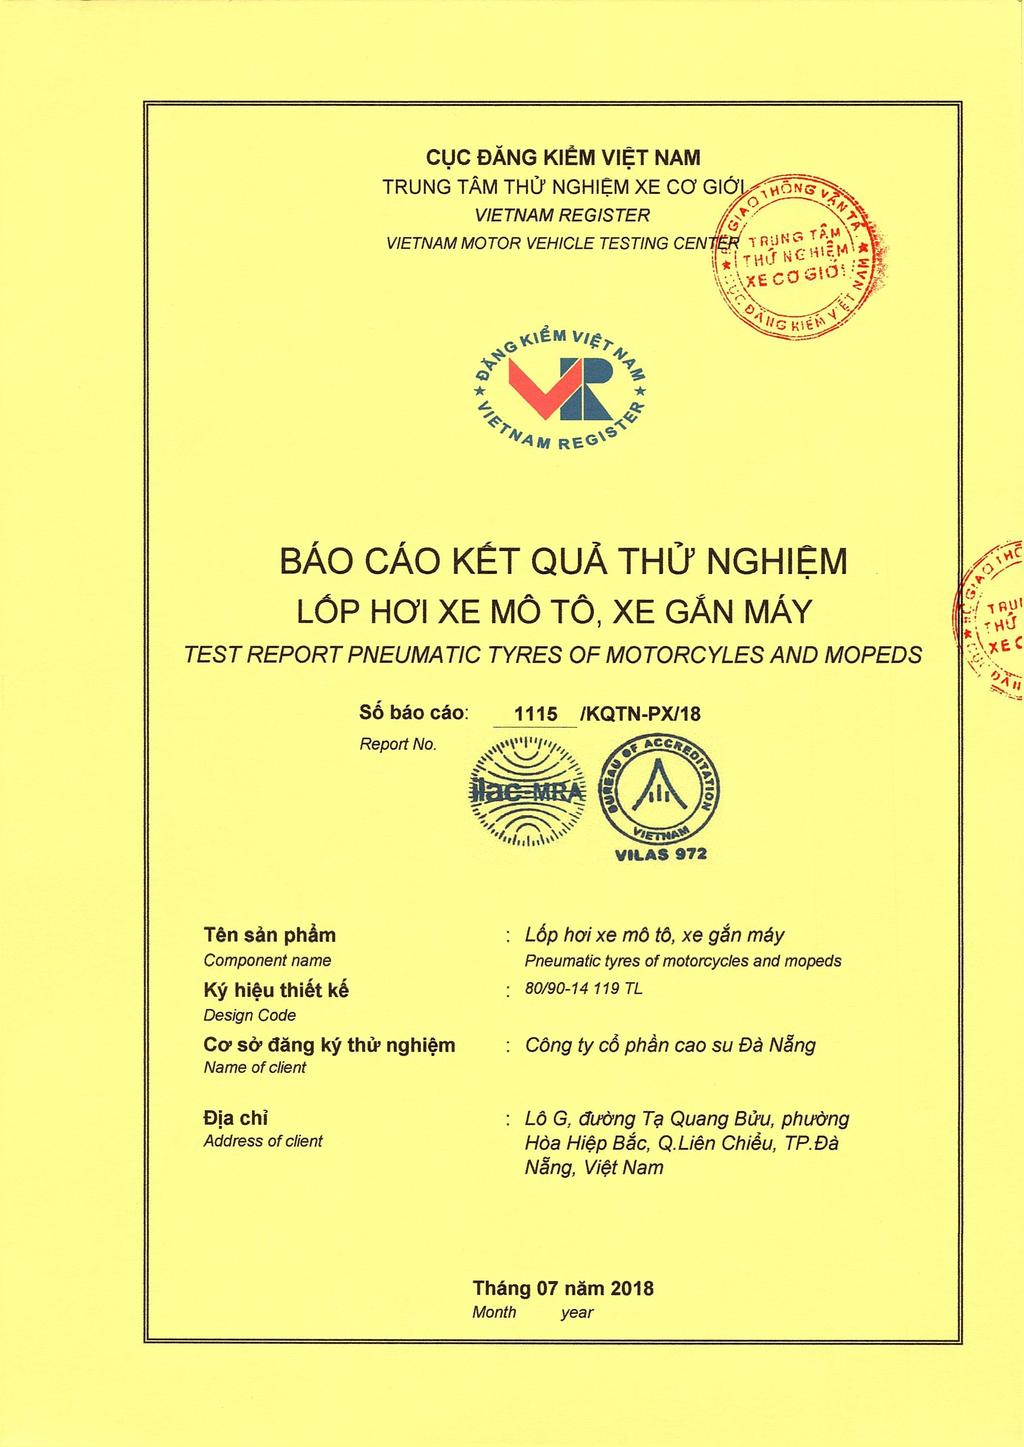 BAO CAO KT QUA THU' NGHll;M LOP HOI XE MO TO, XE GAN MAY TEST REPORT PNEUMATIC TYRES OF MOTORCYLES AND MOPEDS S6 bao cao: 111 s /KQTN-PX/18 Tn san pham Component name Ky hiu thiitt kit Design Code